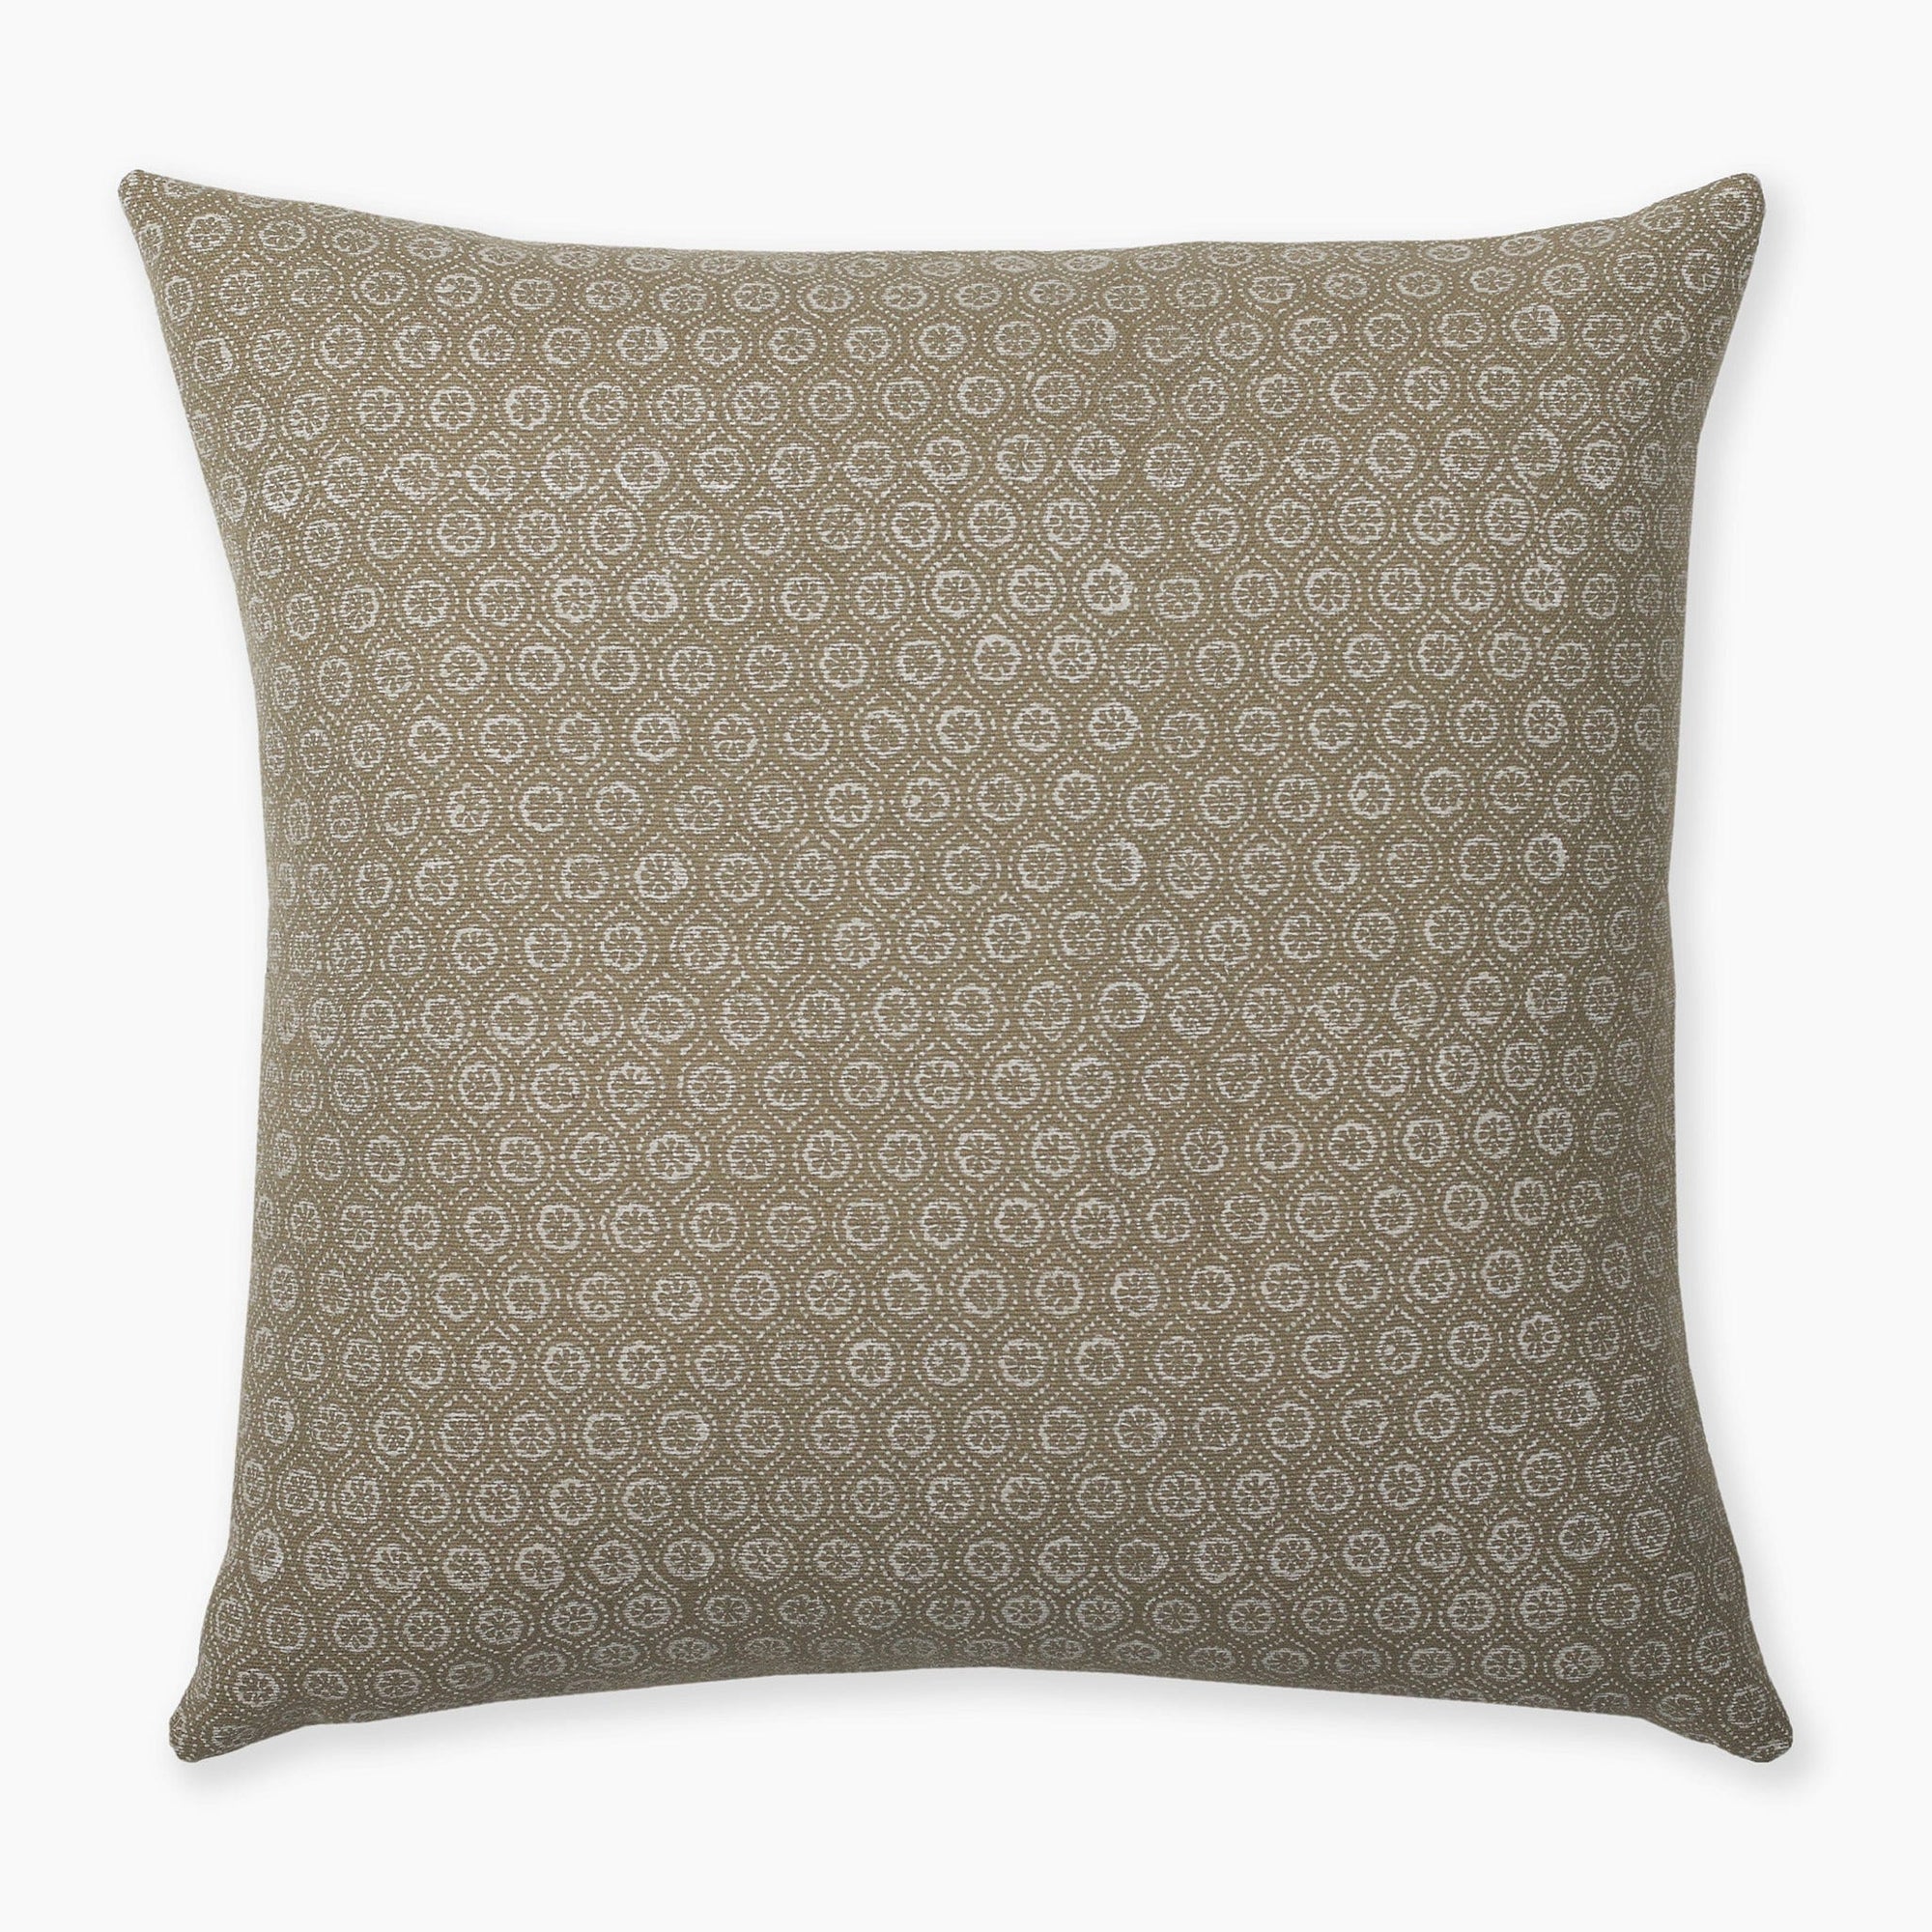 Olive green pillow cover with white floral motif from Colin and Finn.